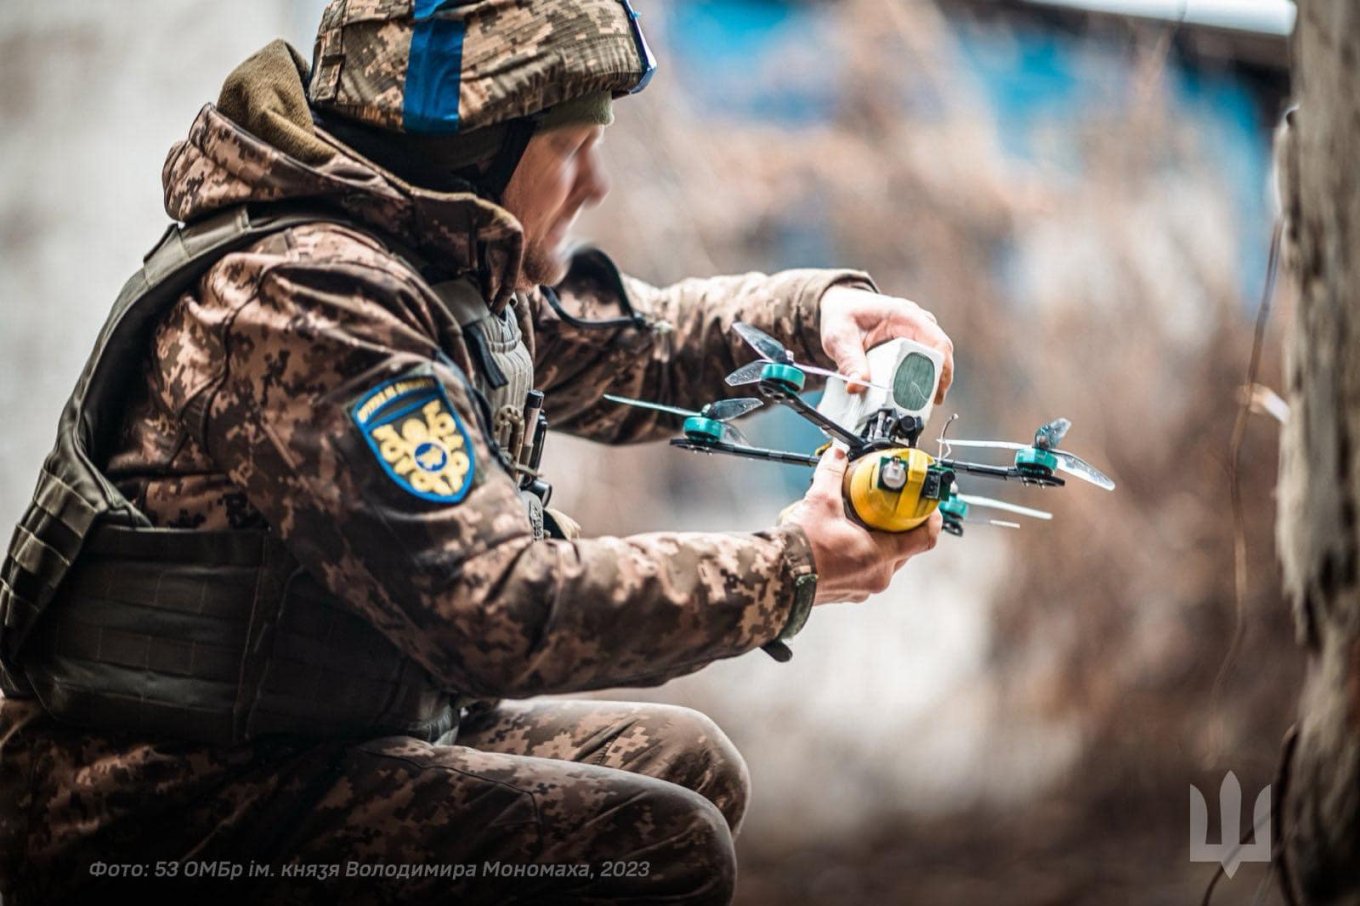 A fully equipped FPV drone, with an explosive and a battery, is ready to strike its target